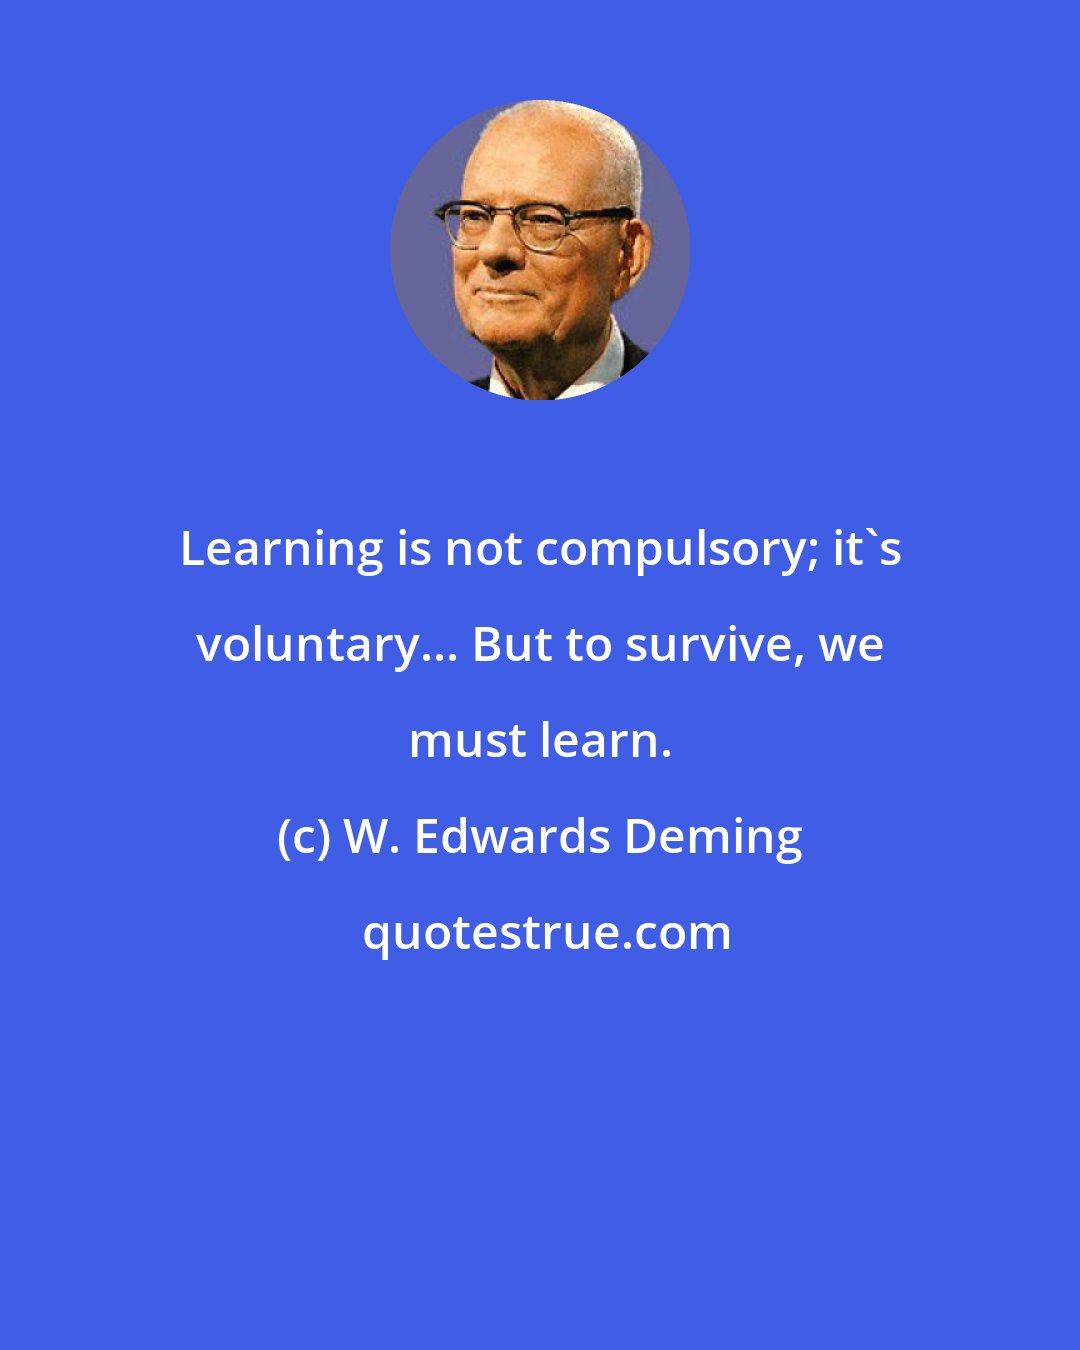 W. Edwards Deming: Learning is not compulsory; it's voluntary... But to survive, we must learn.